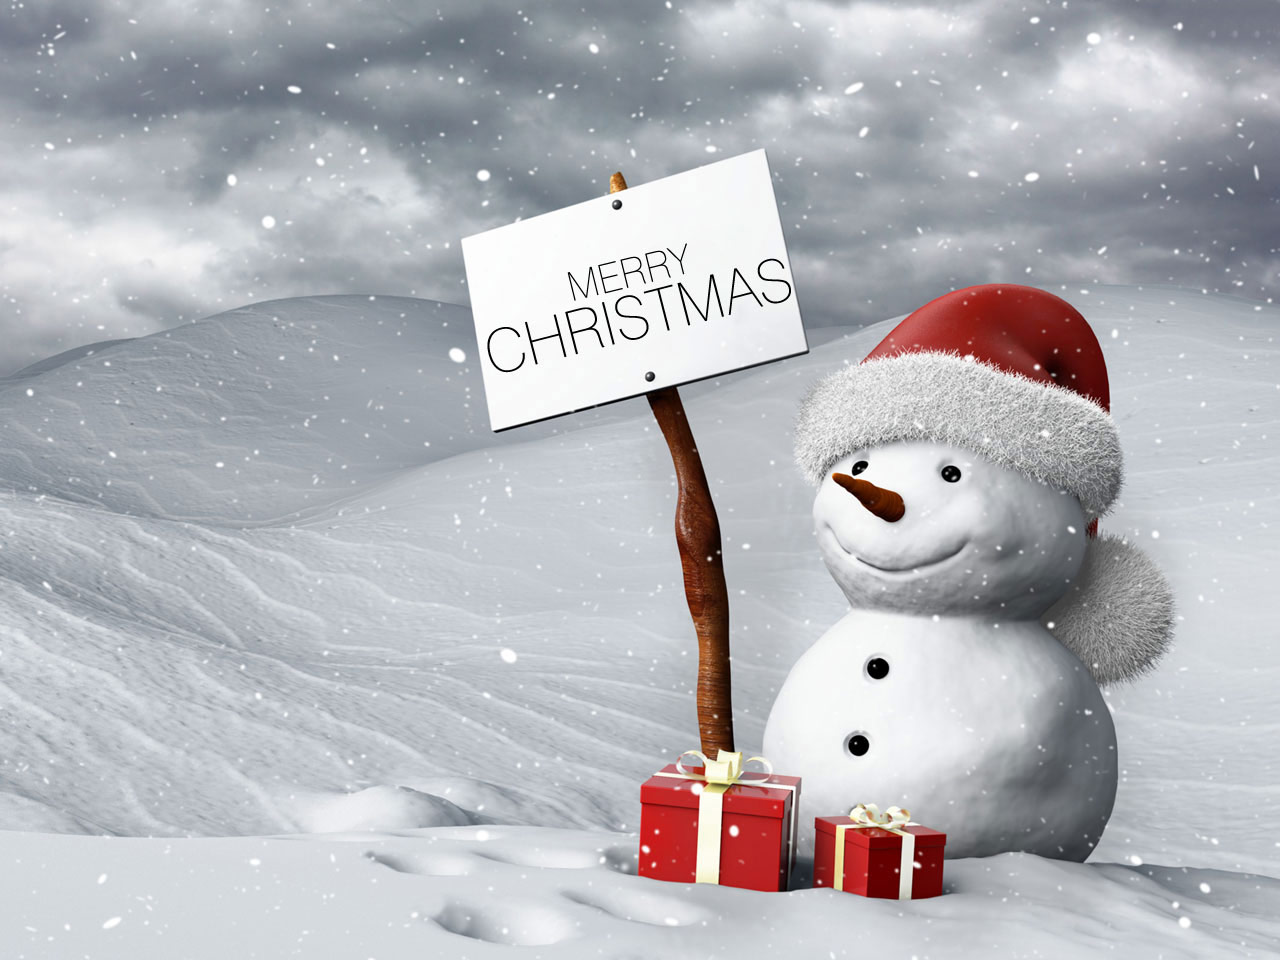 Pretty Christmas Background Wallpaper Image